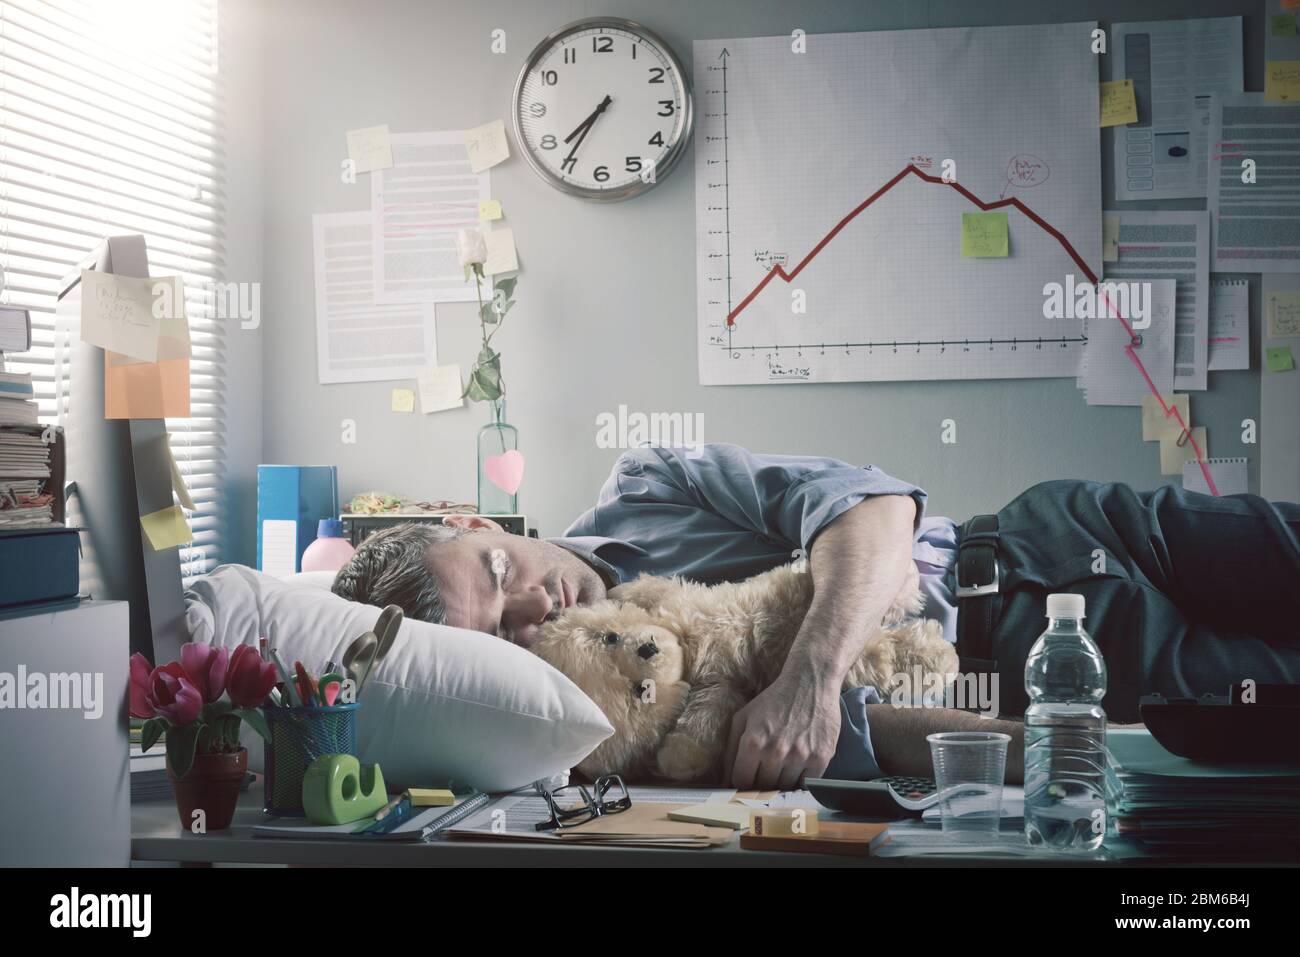 Funny office worker sleeping in the office overnight with teddy bear. Stock Photo